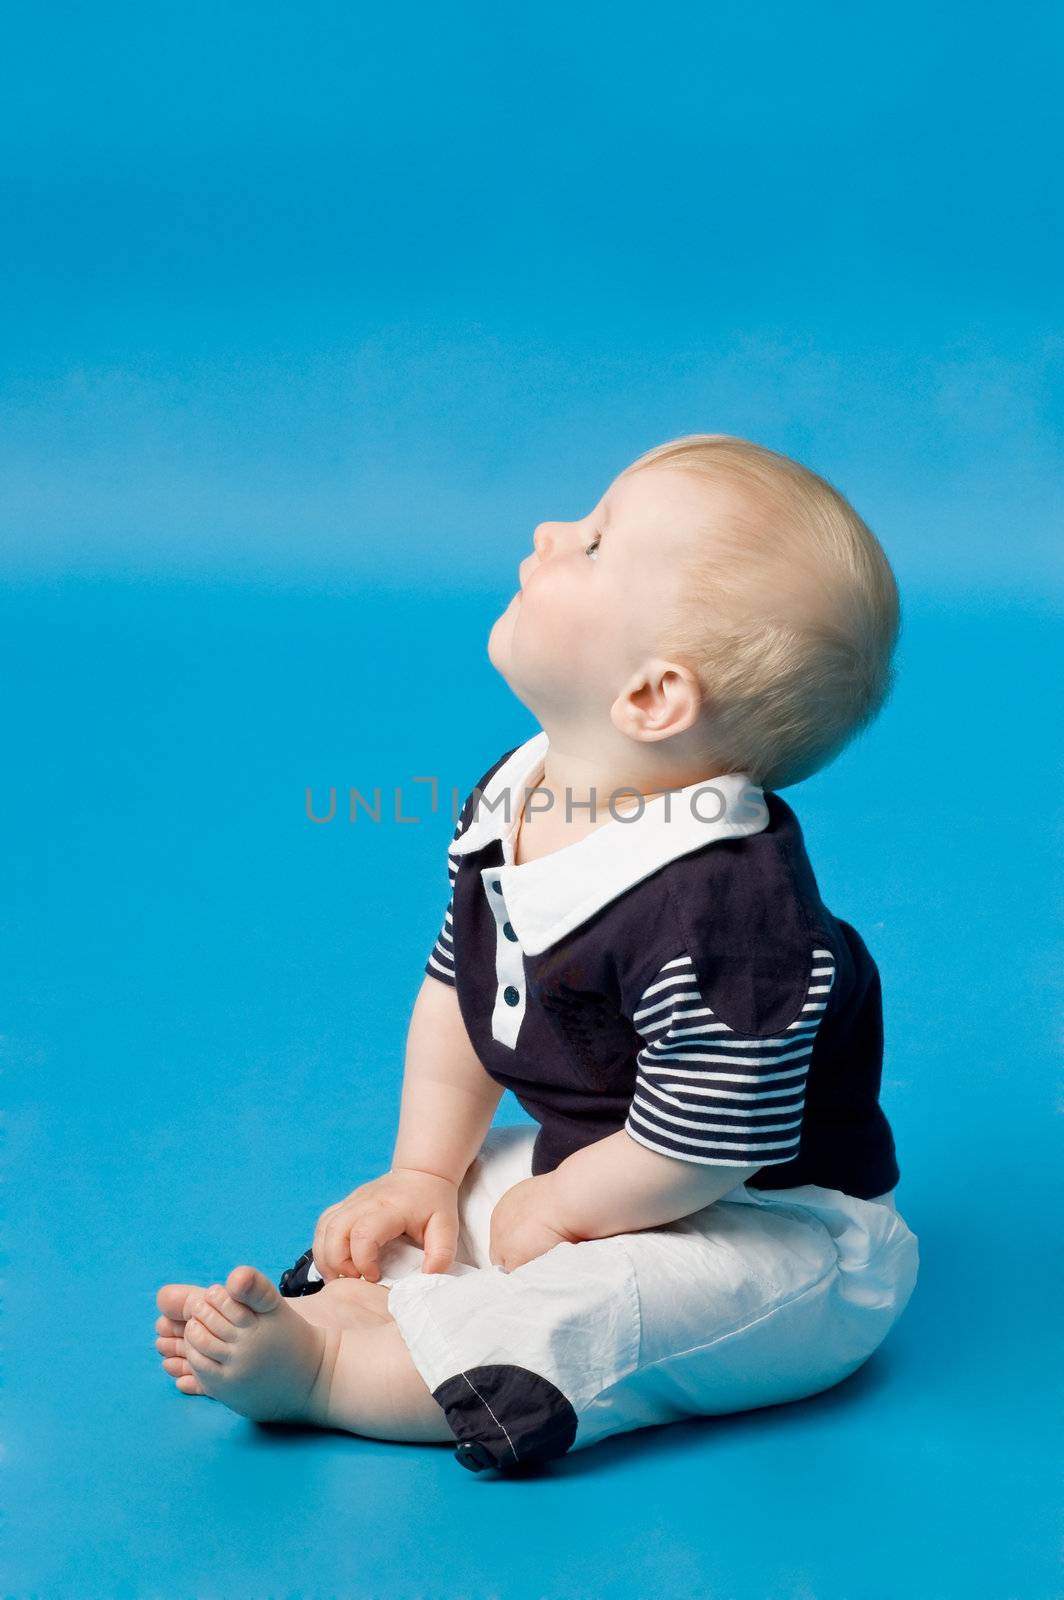 The small child in studio, on a blue background